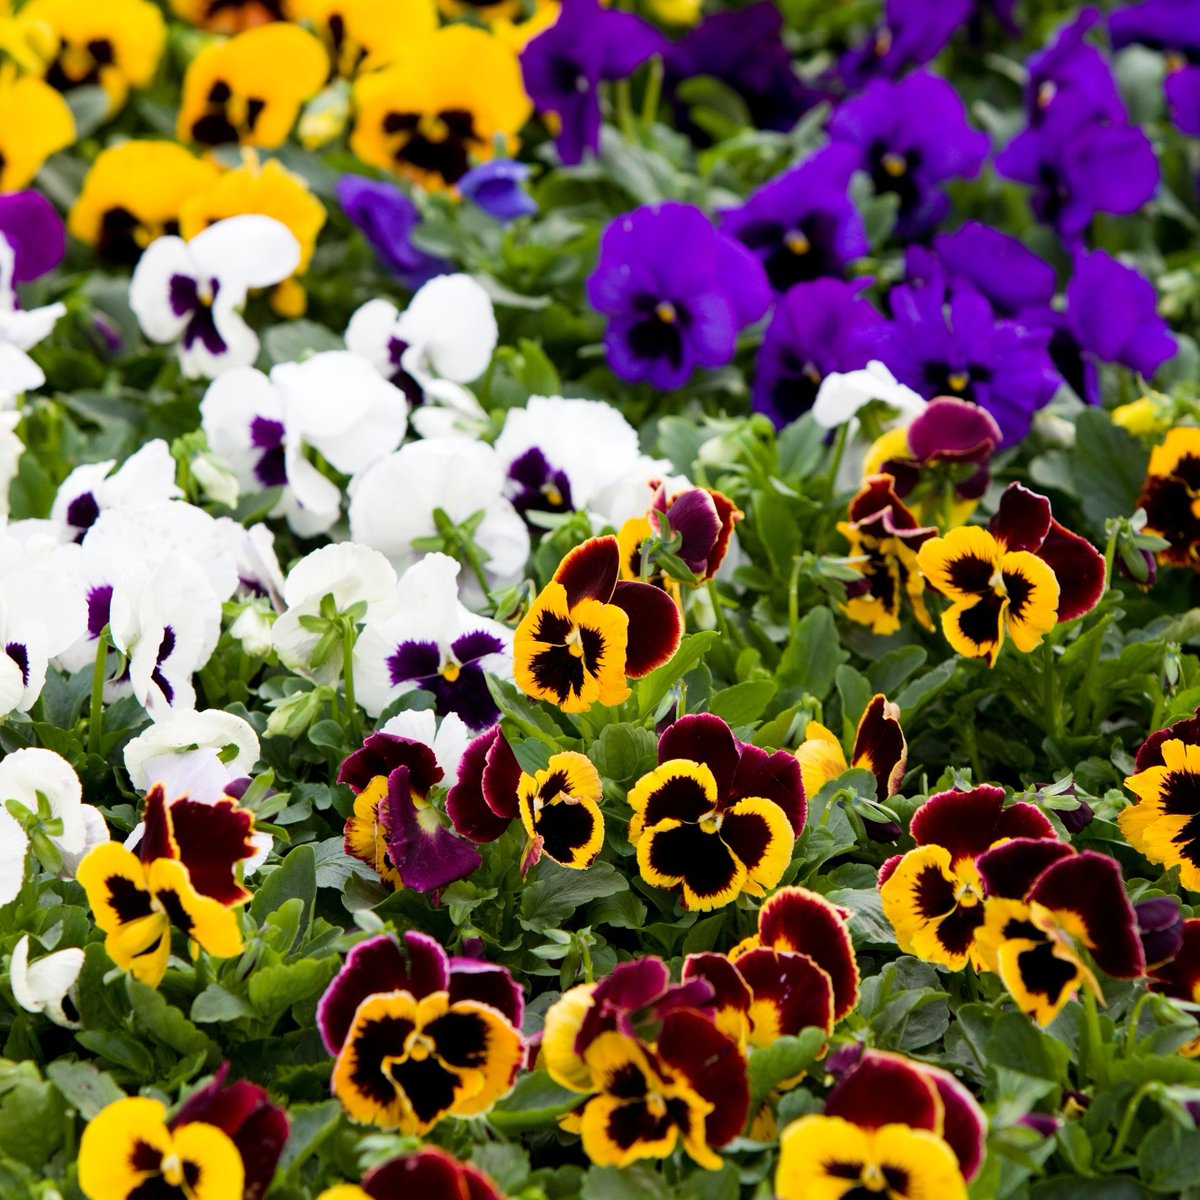 Mother Nature can’t make up her mind about what Minnesota should be in these early spring months. However, pansies are a sure sign that warmer weather is near! Look for pansies in the Floral Department now!🌼